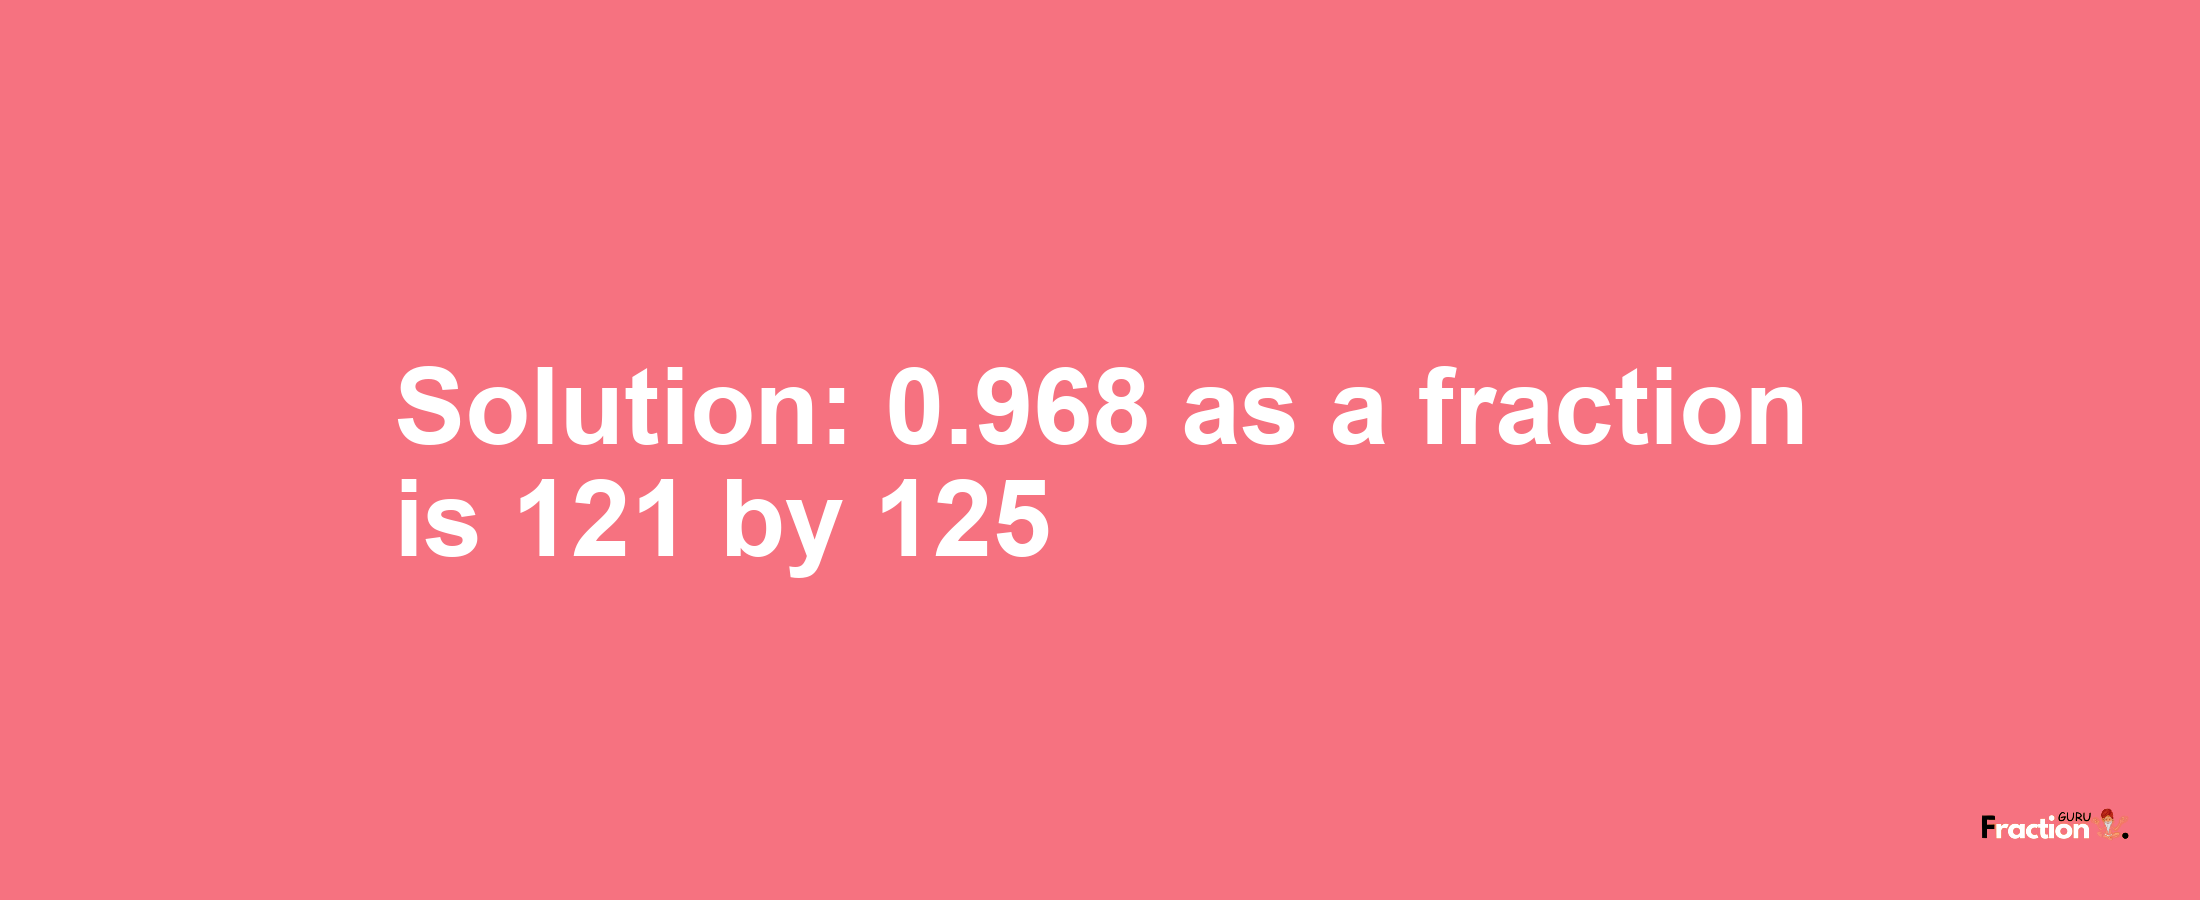 Solution:0.968 as a fraction is 121/125